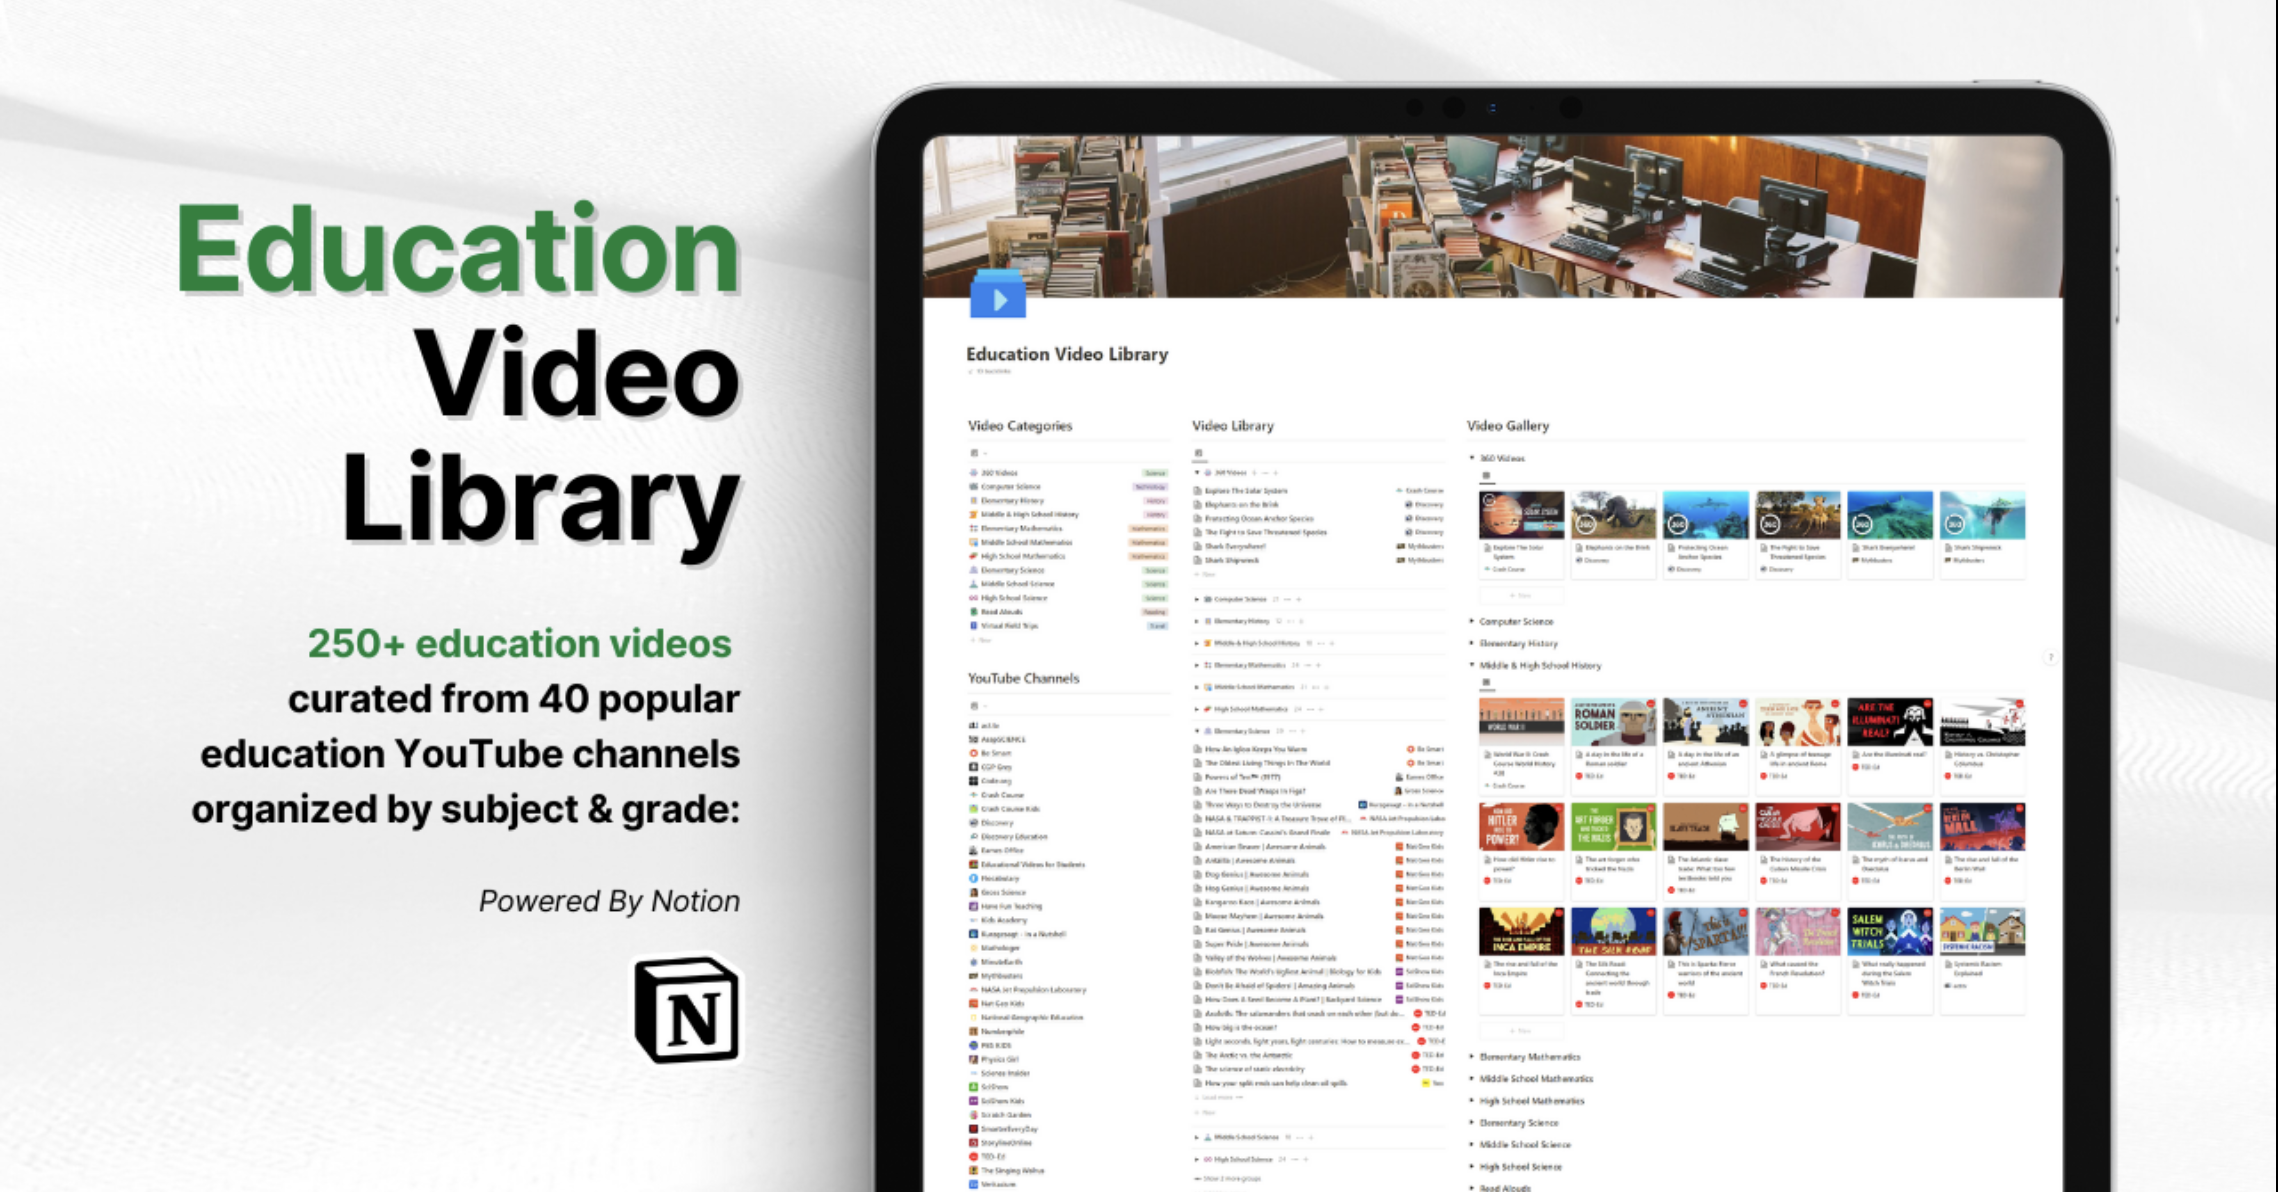 Education Video Library Image